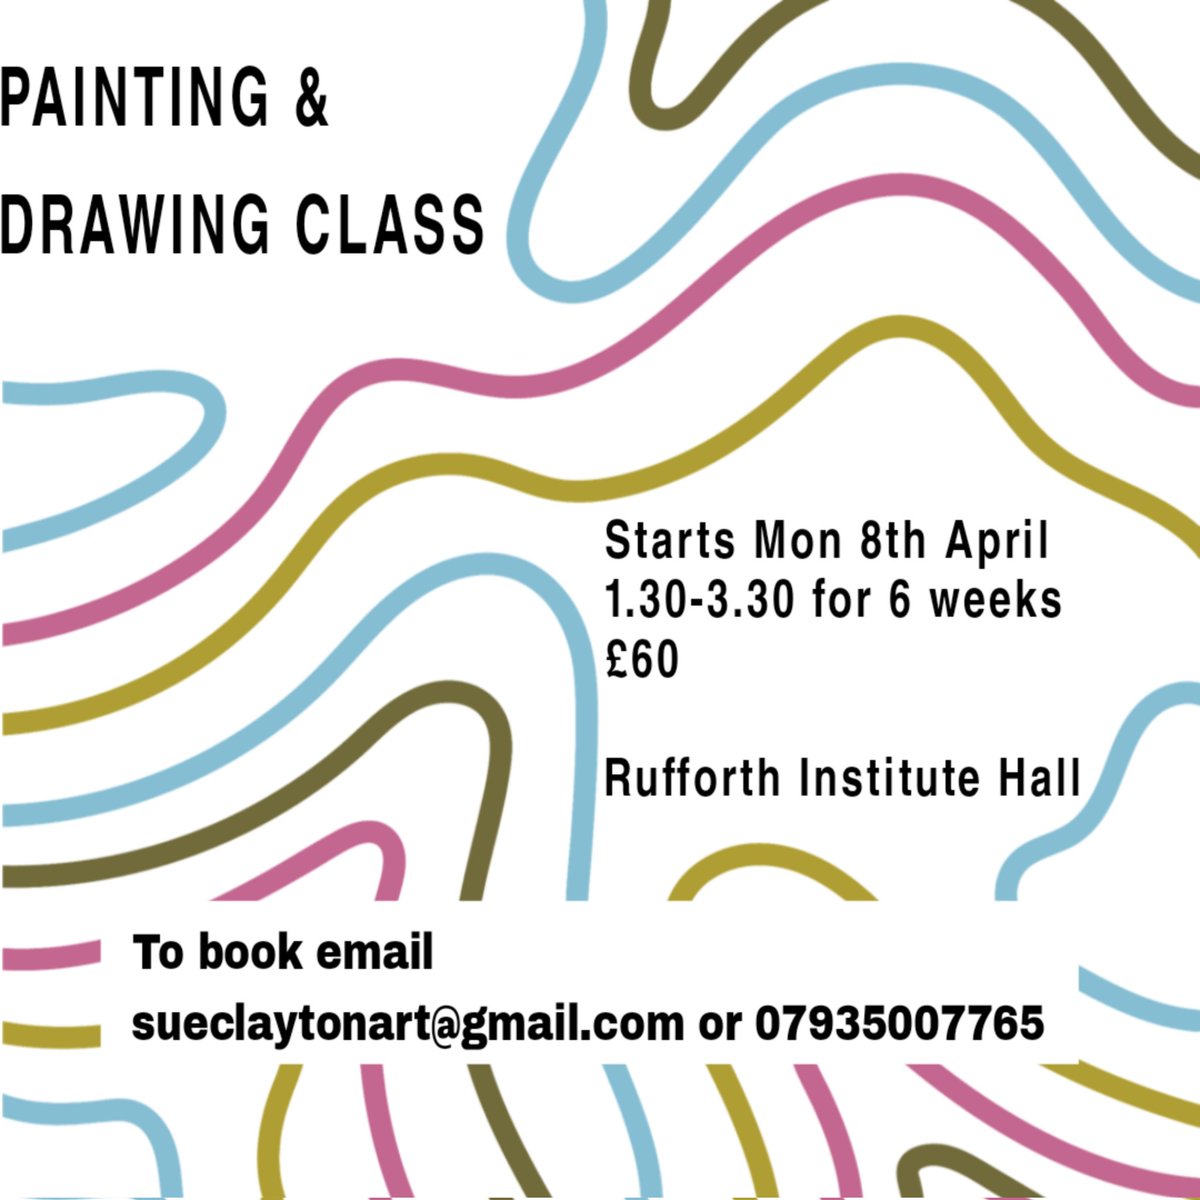 Painting and Drawing class starts again Mon 8th April 1.30-3.30 at Rufforth Institute Hall. This term we will travel accross the Yorkshire Ridings, taking inspiration each week from artists and the cities featured. A fun, relaxed group suitable for all levels. Course fee £60